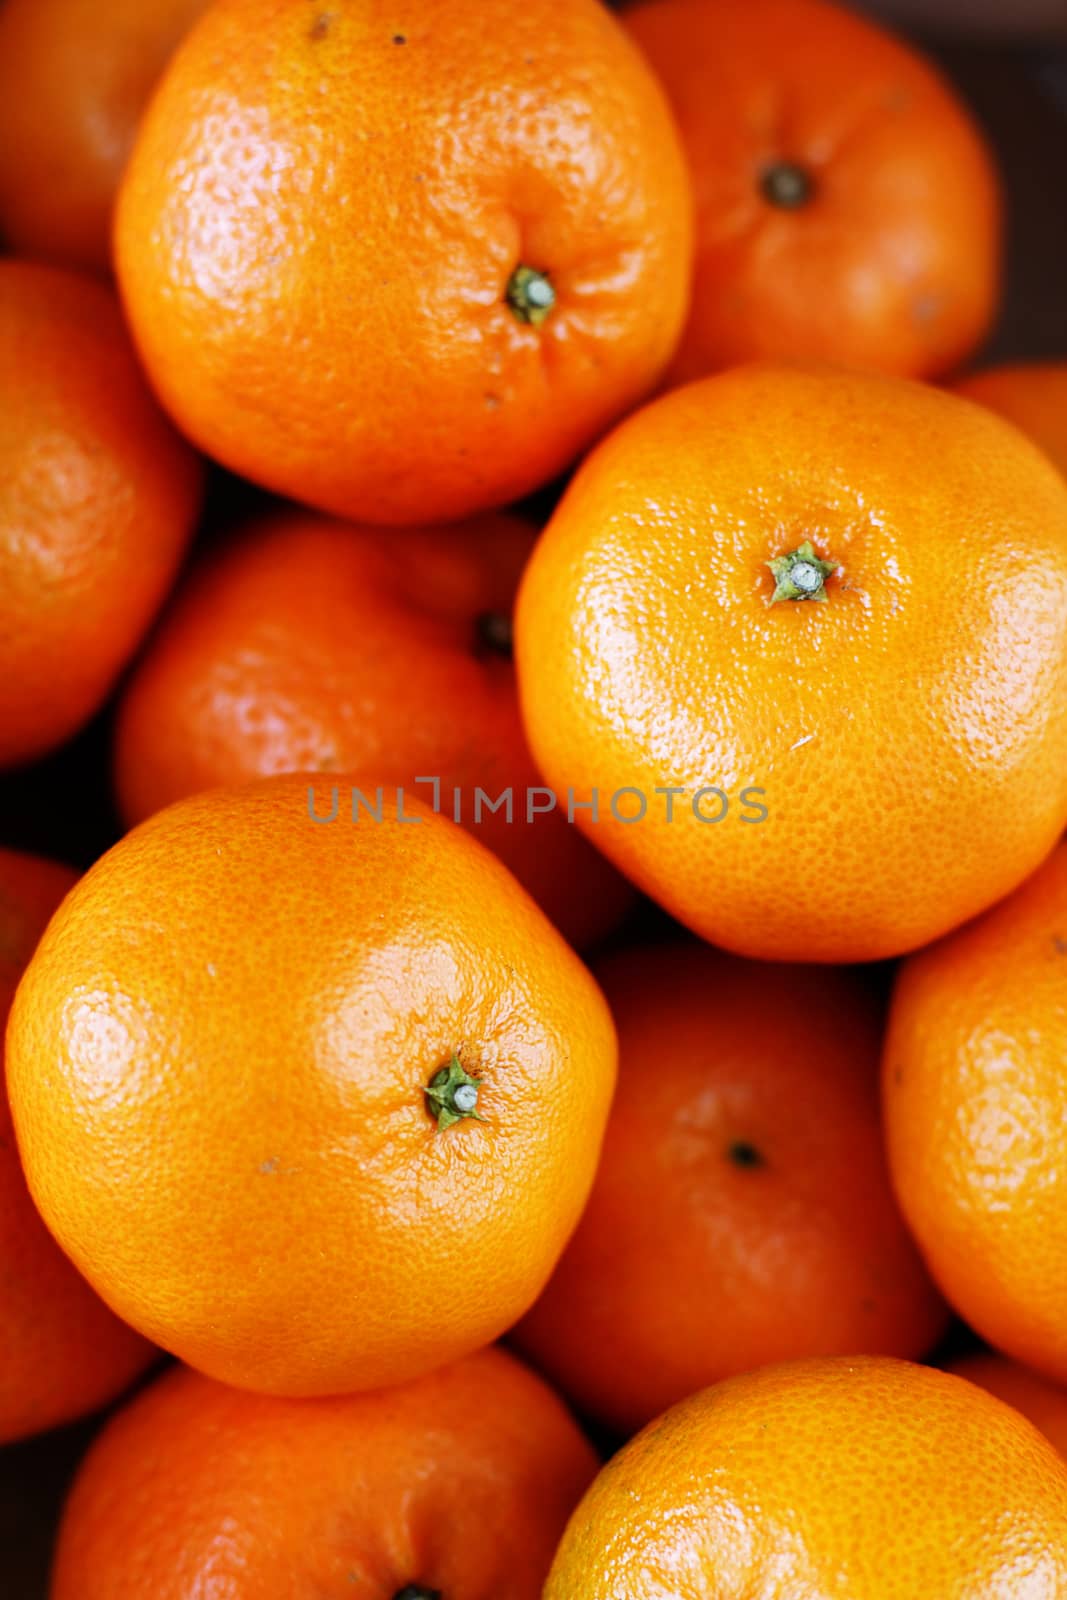 A photo of ripe tangerines